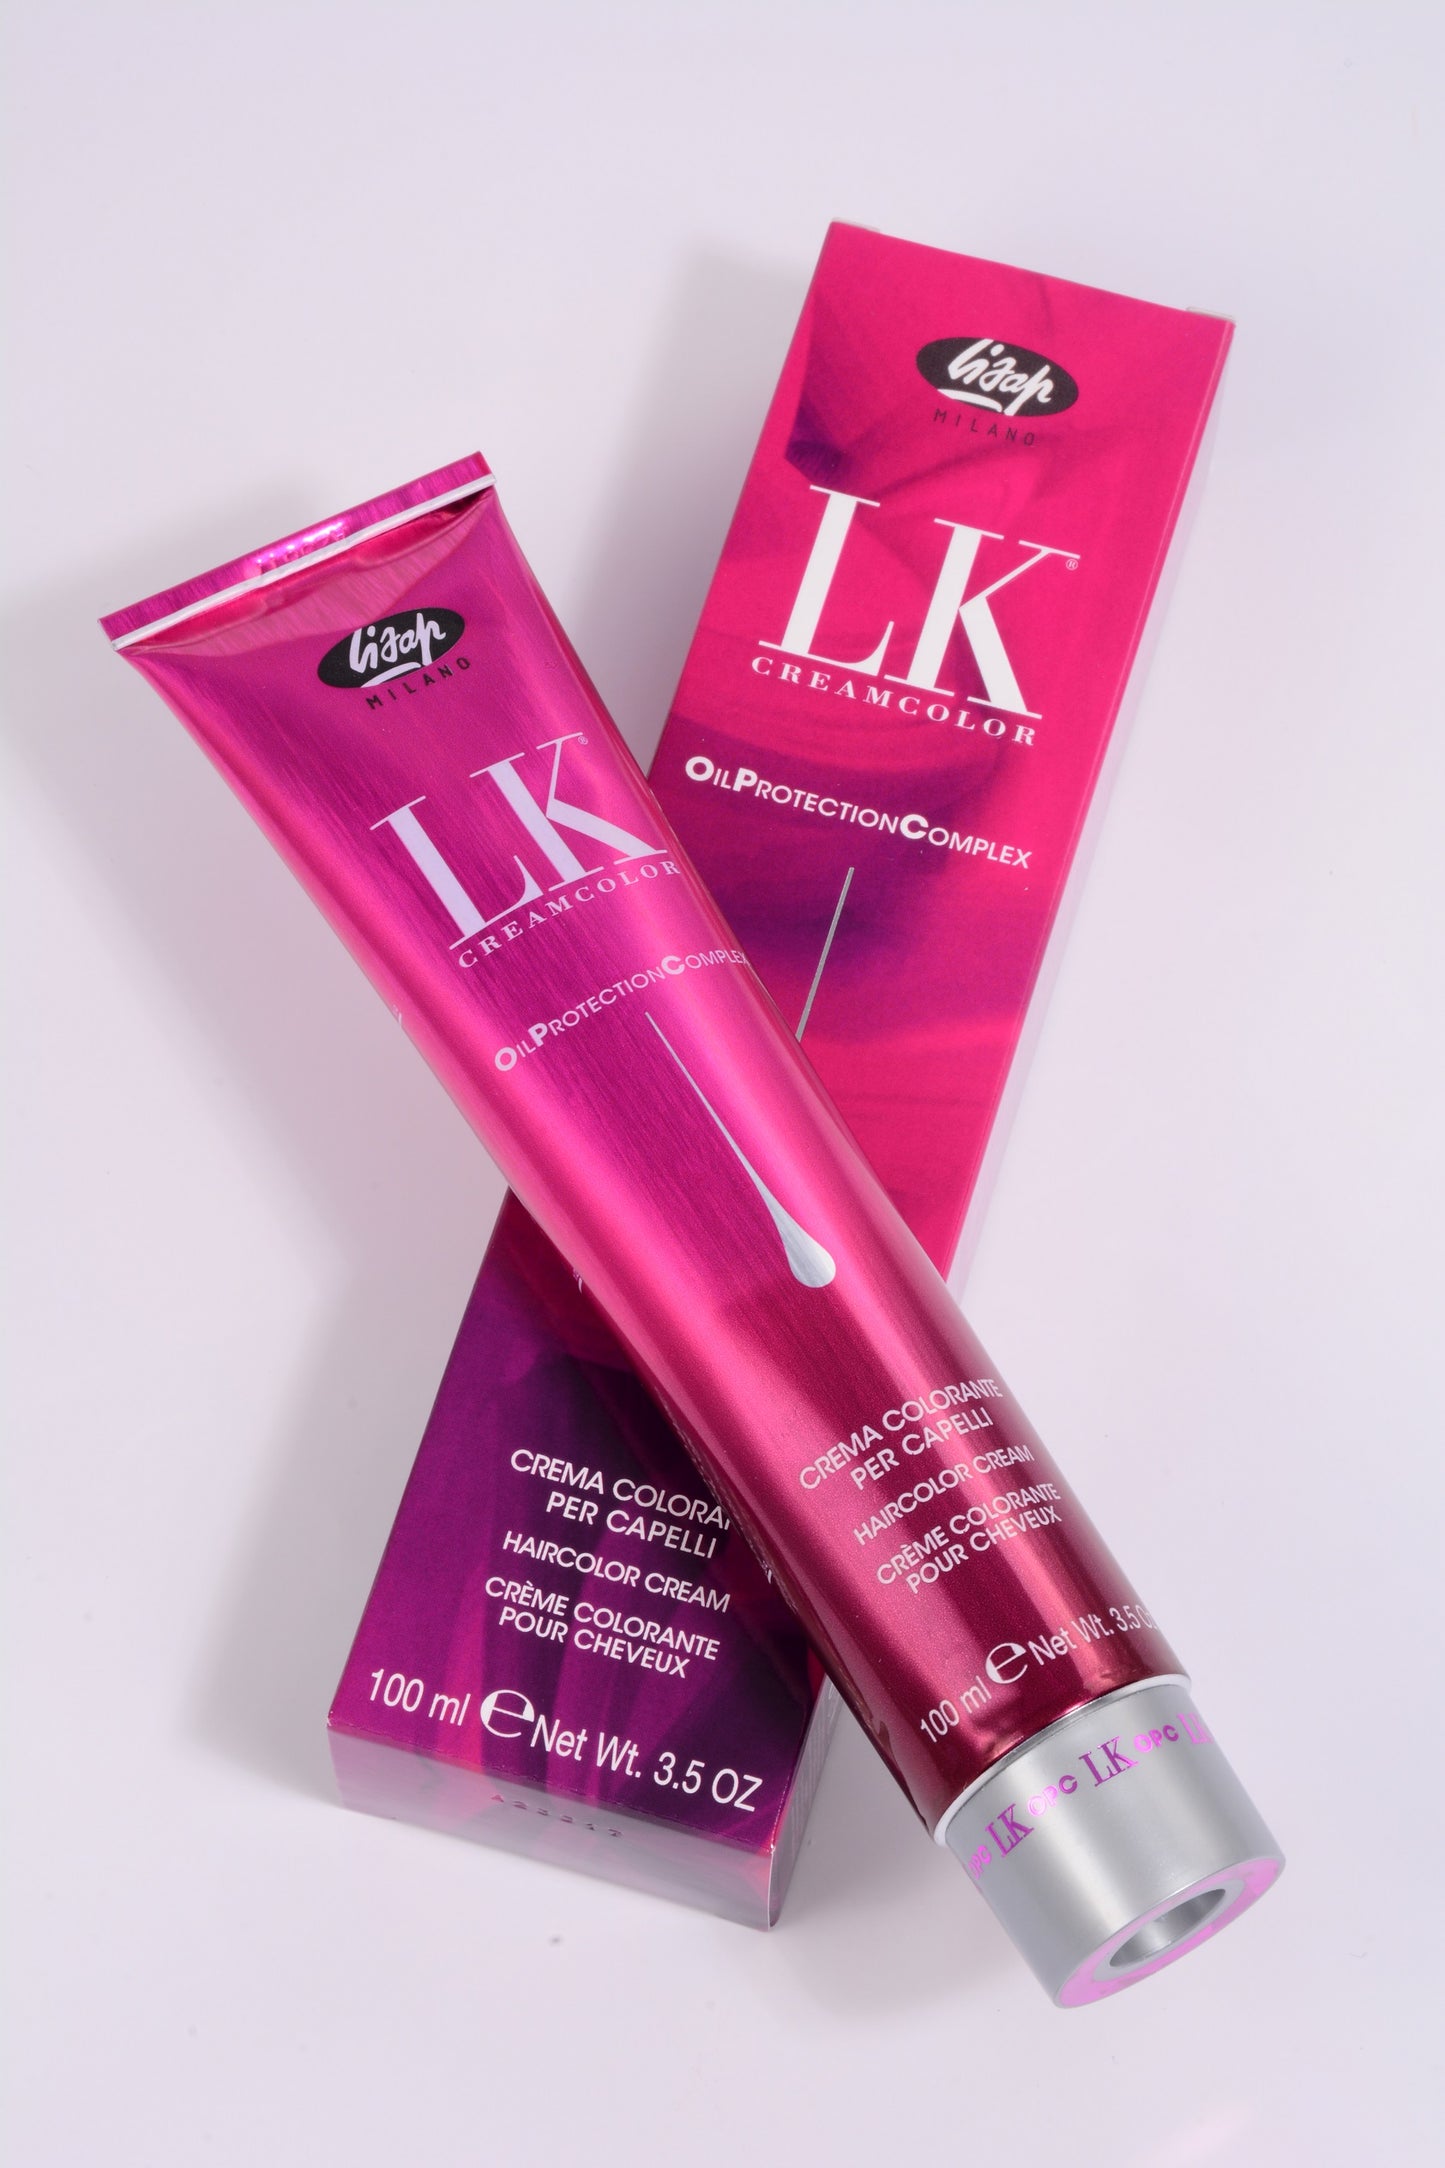 LK Creamcolor 77/00 Oil Protection Complex